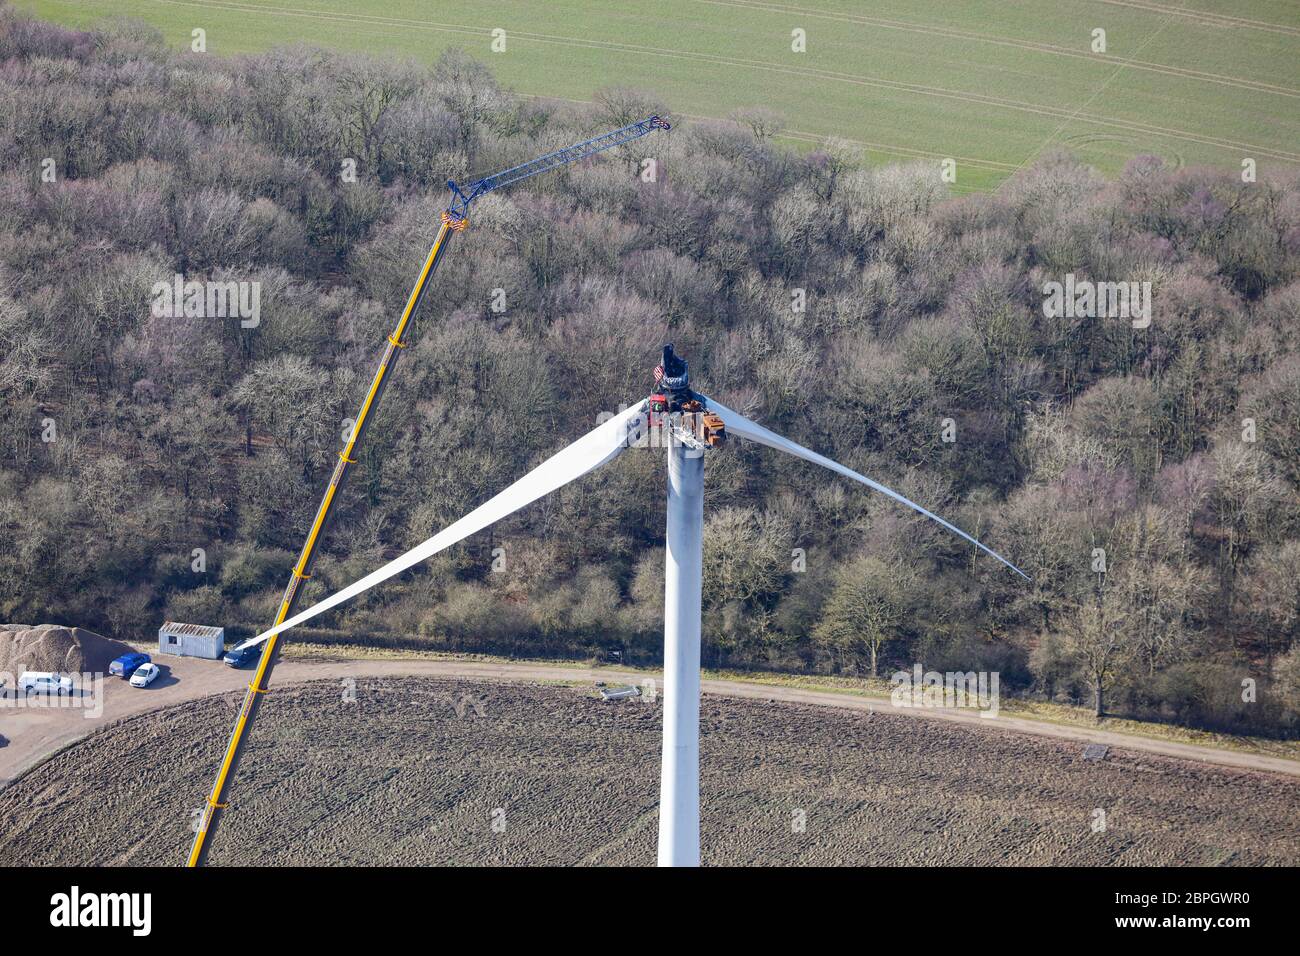 Aerial View of Wind Turbine Damage near A689 Road Stock Photo